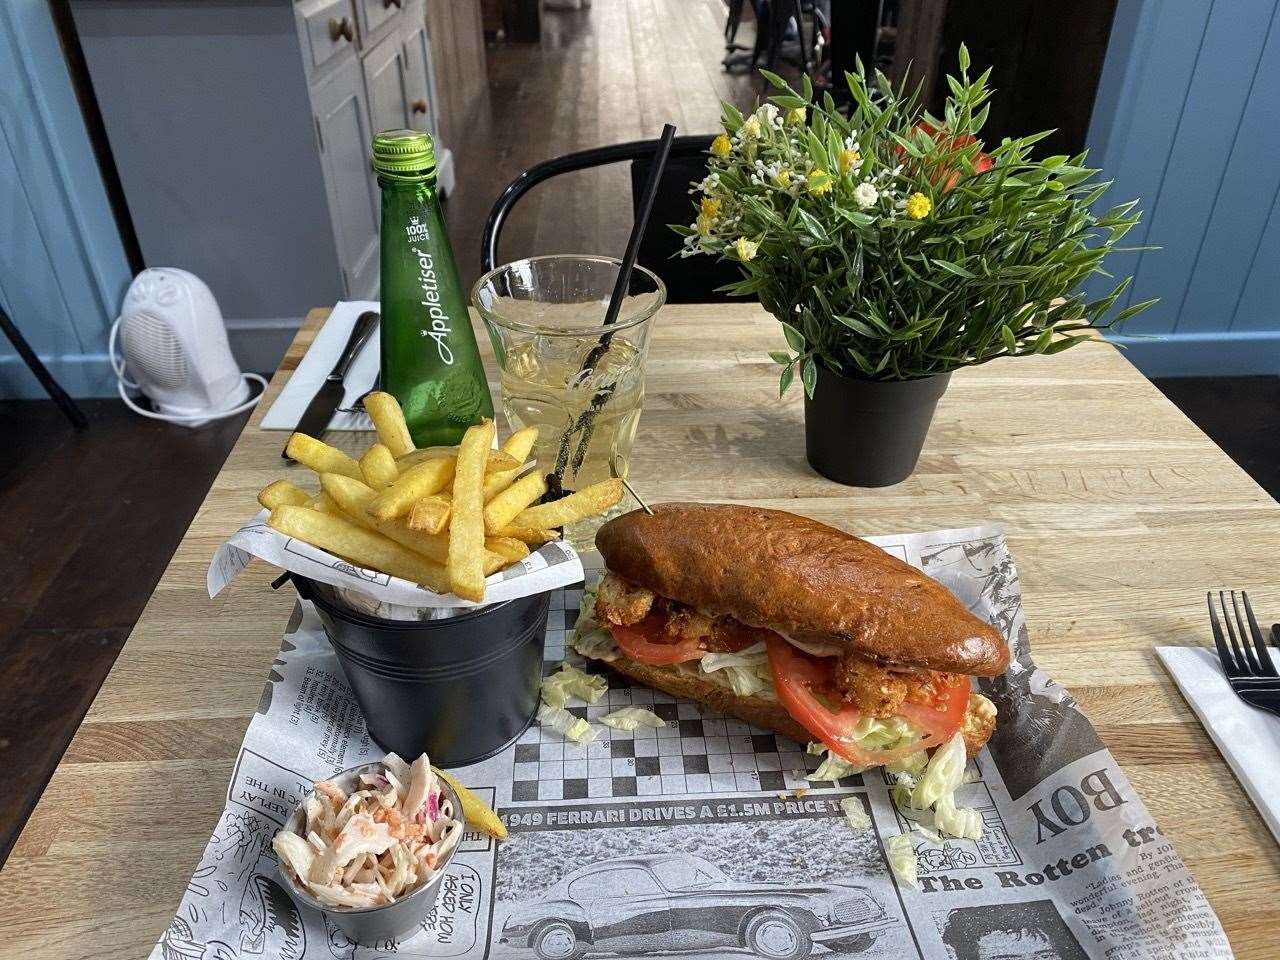 A tasty sandwich, chips, salad and a drink made for a delightful lunch